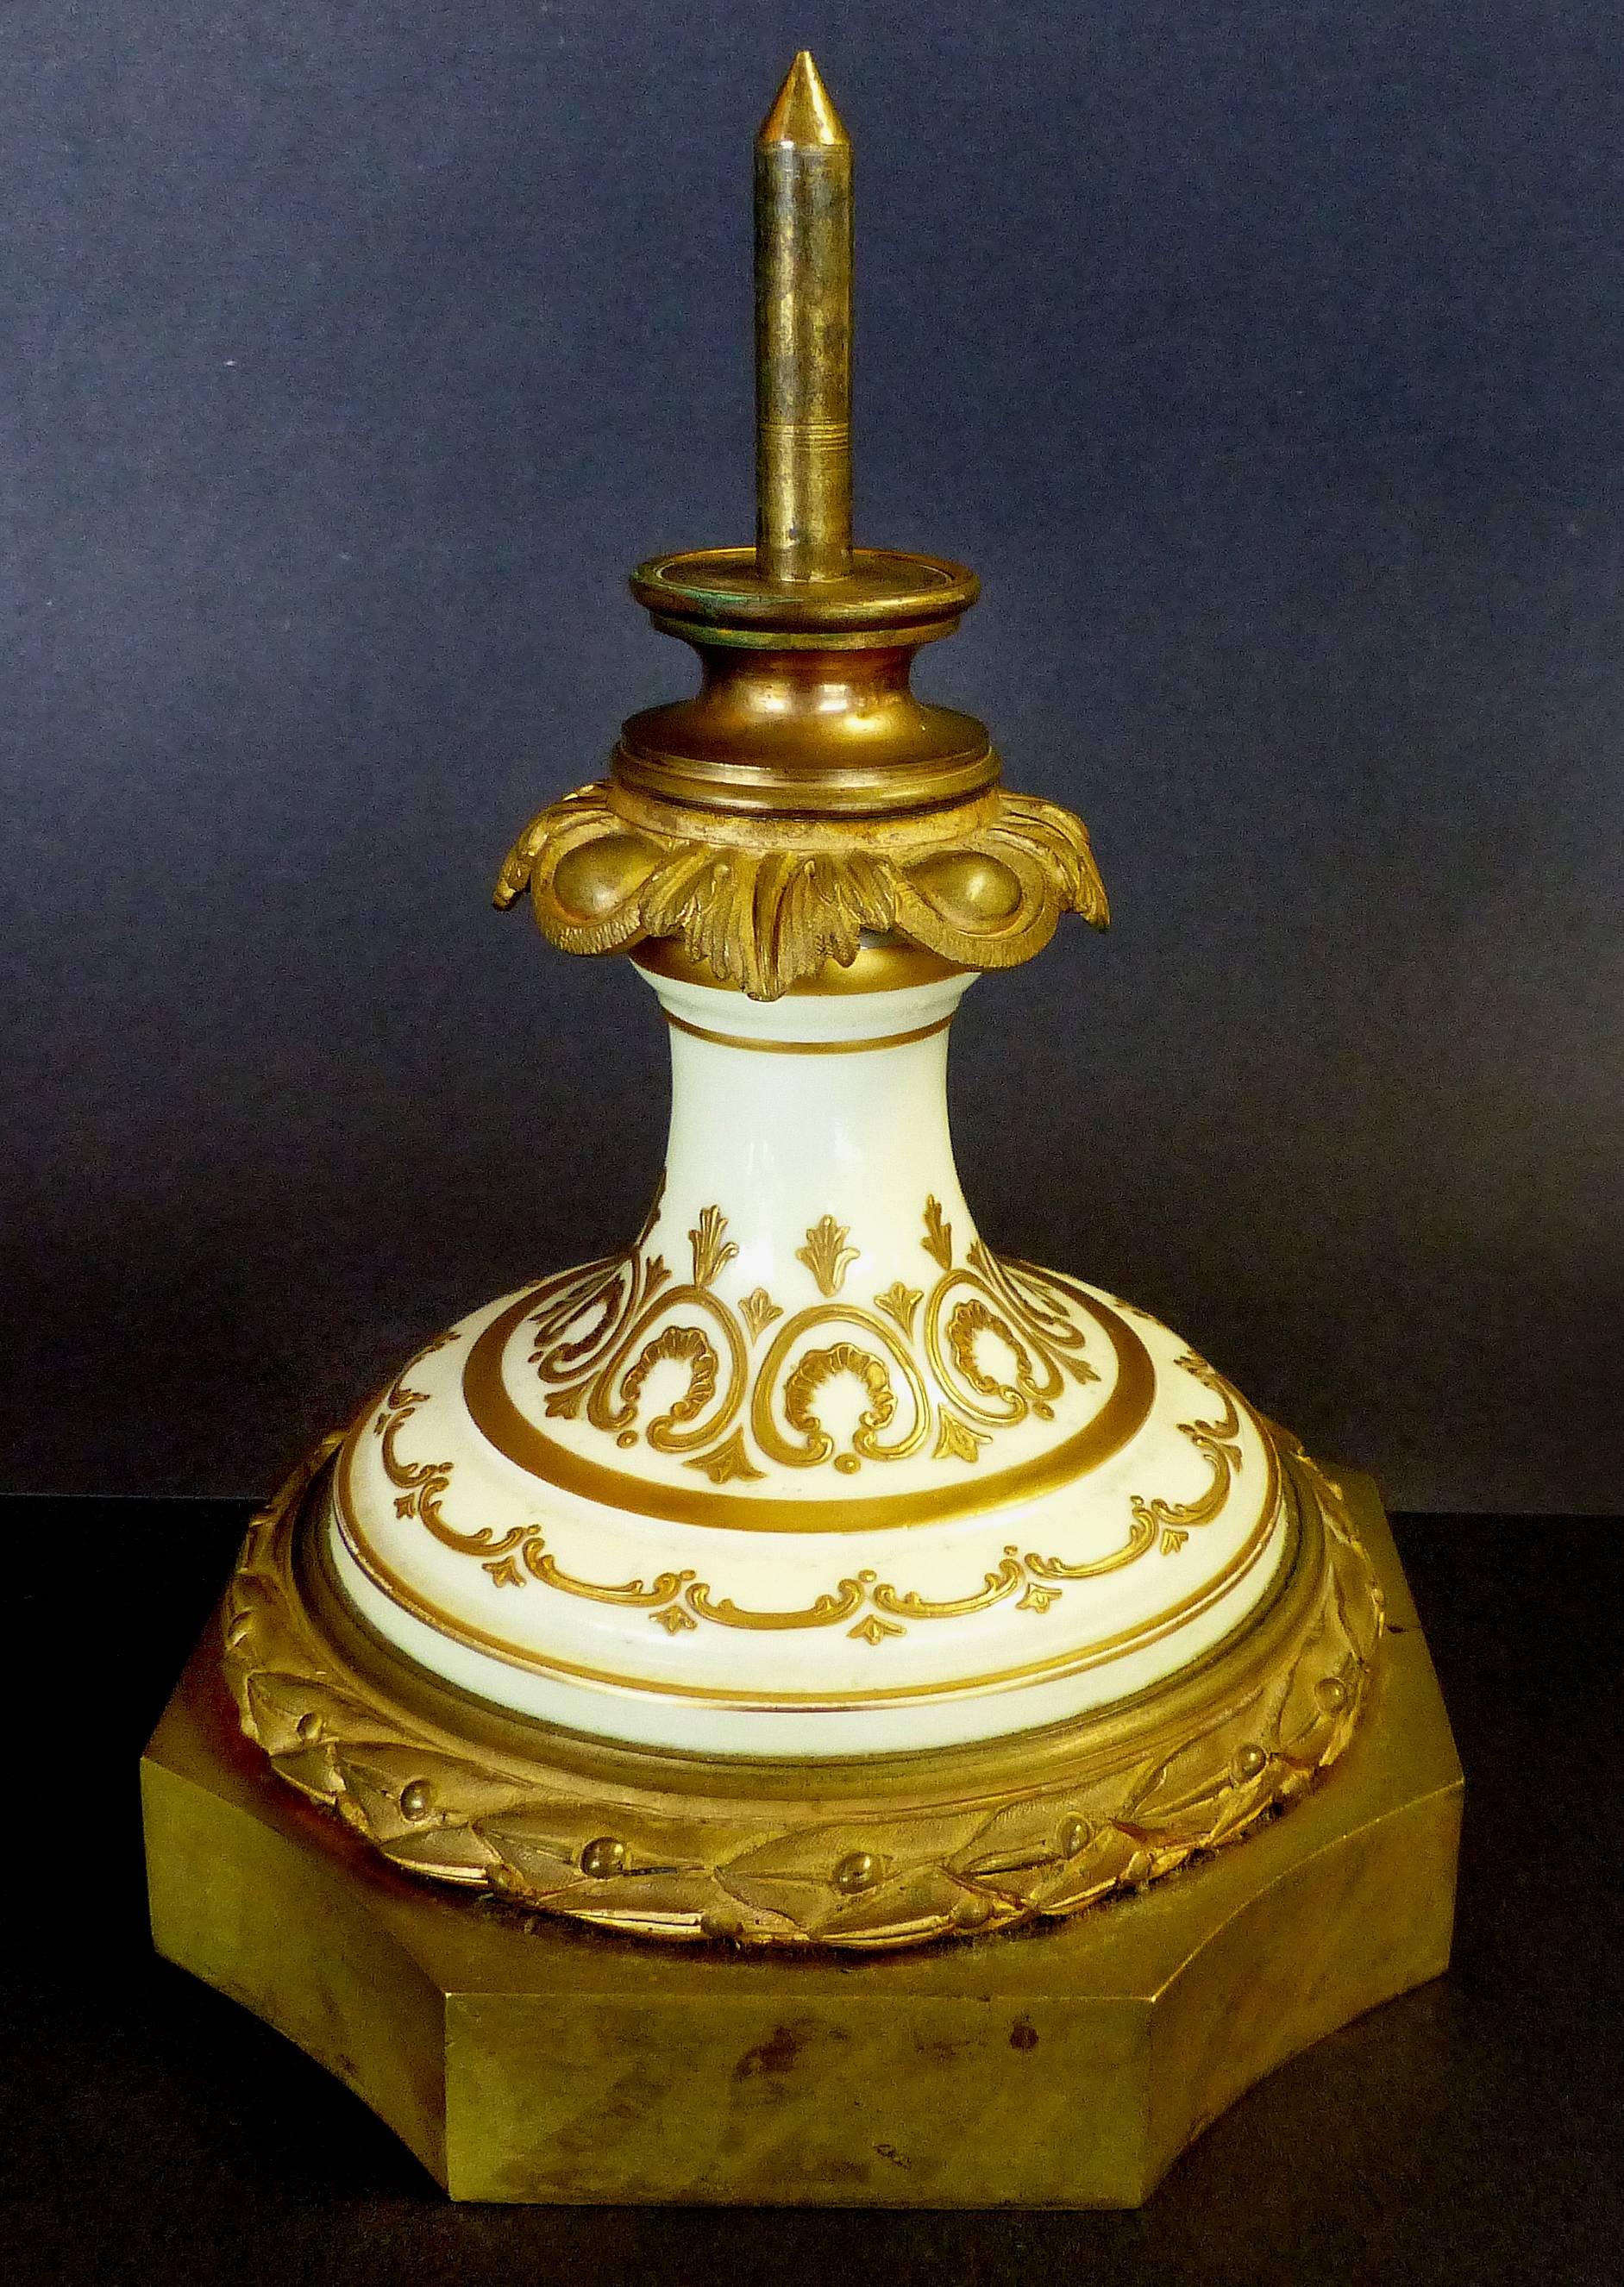 Cast 19th Century Hand-Painted Sevres Covered Urn Mounted in Gilt Bronze, Signed